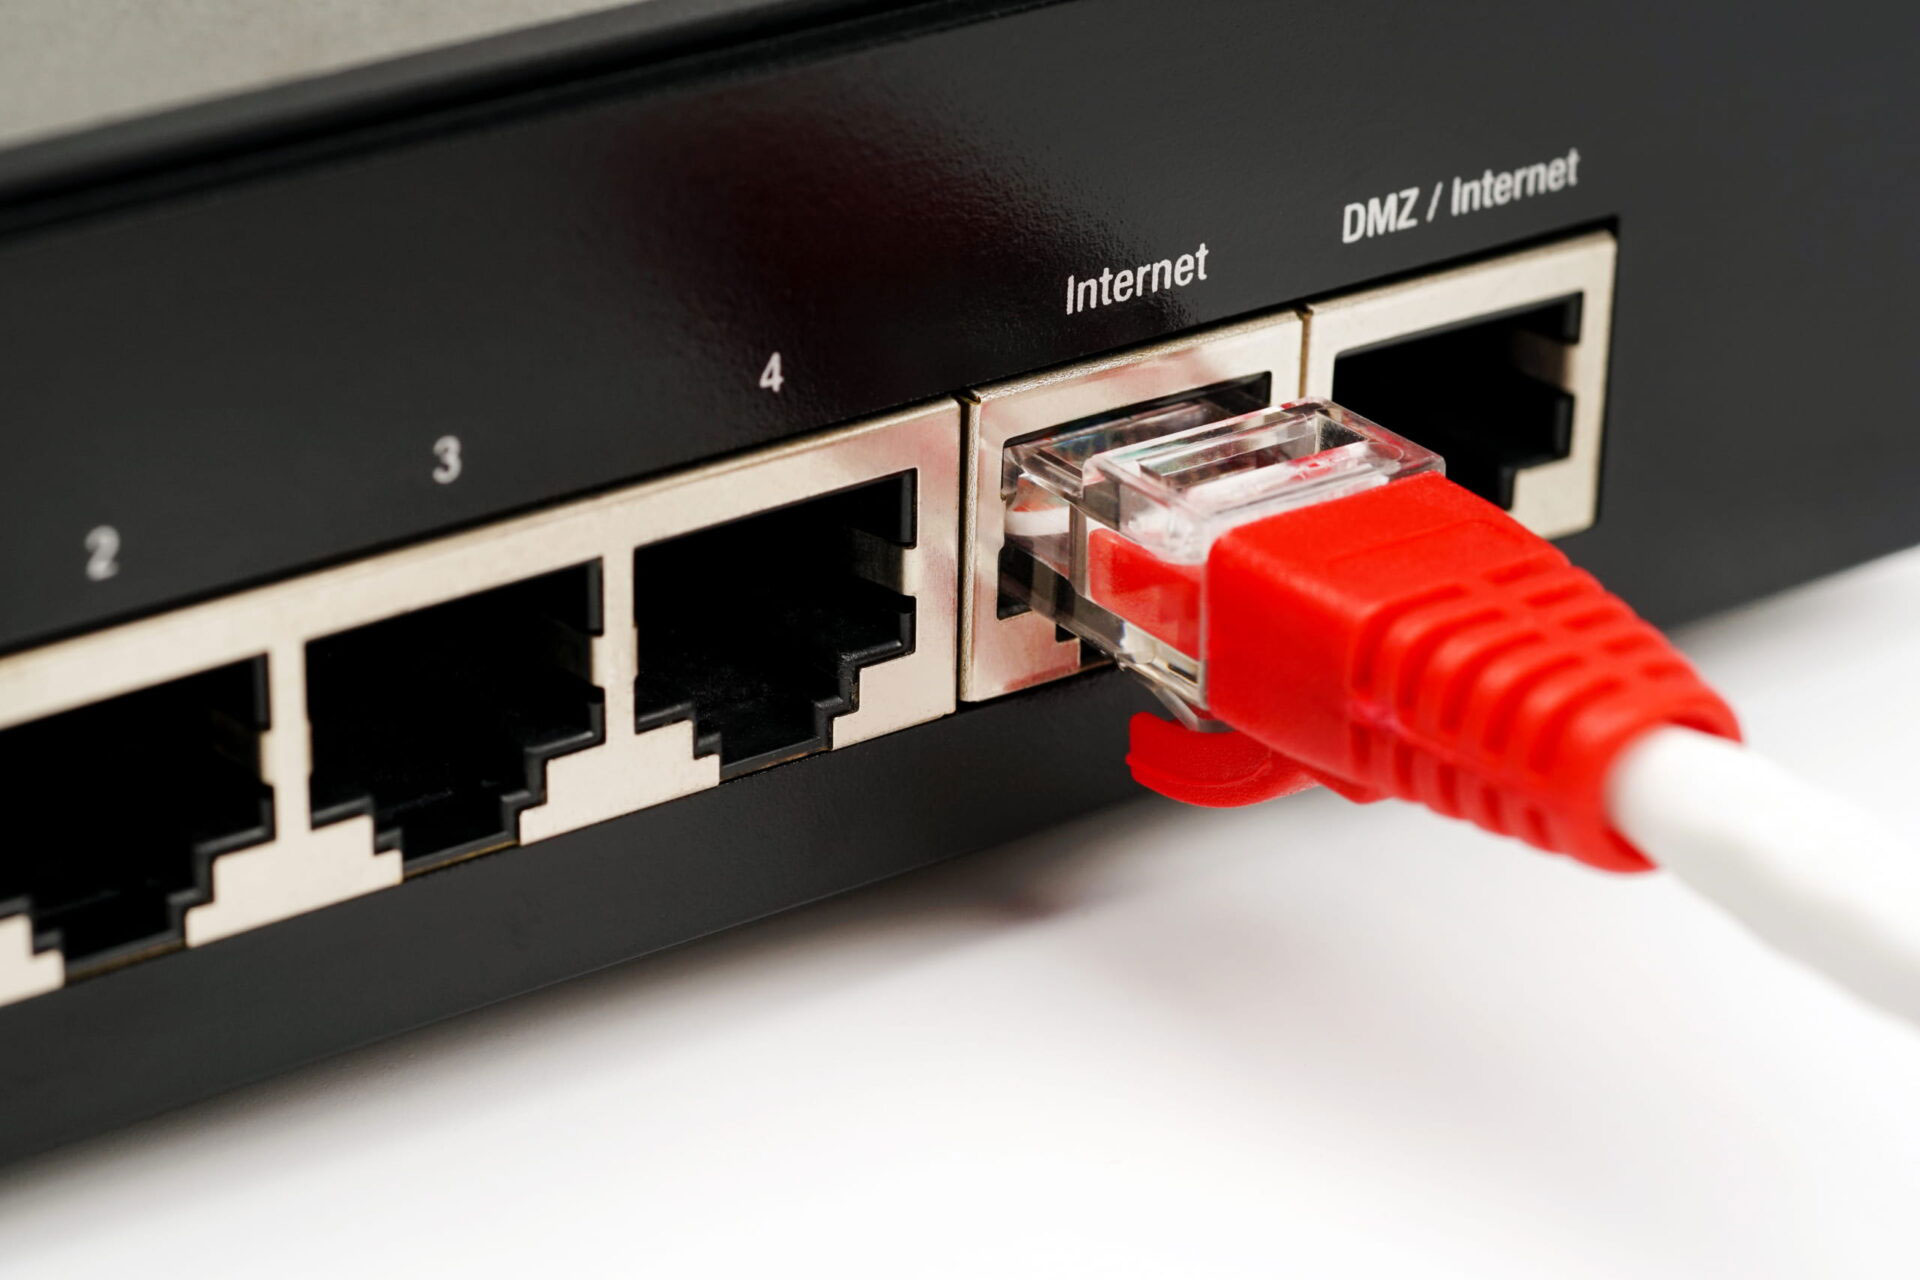 Network Switches for Small Businesses in london UK